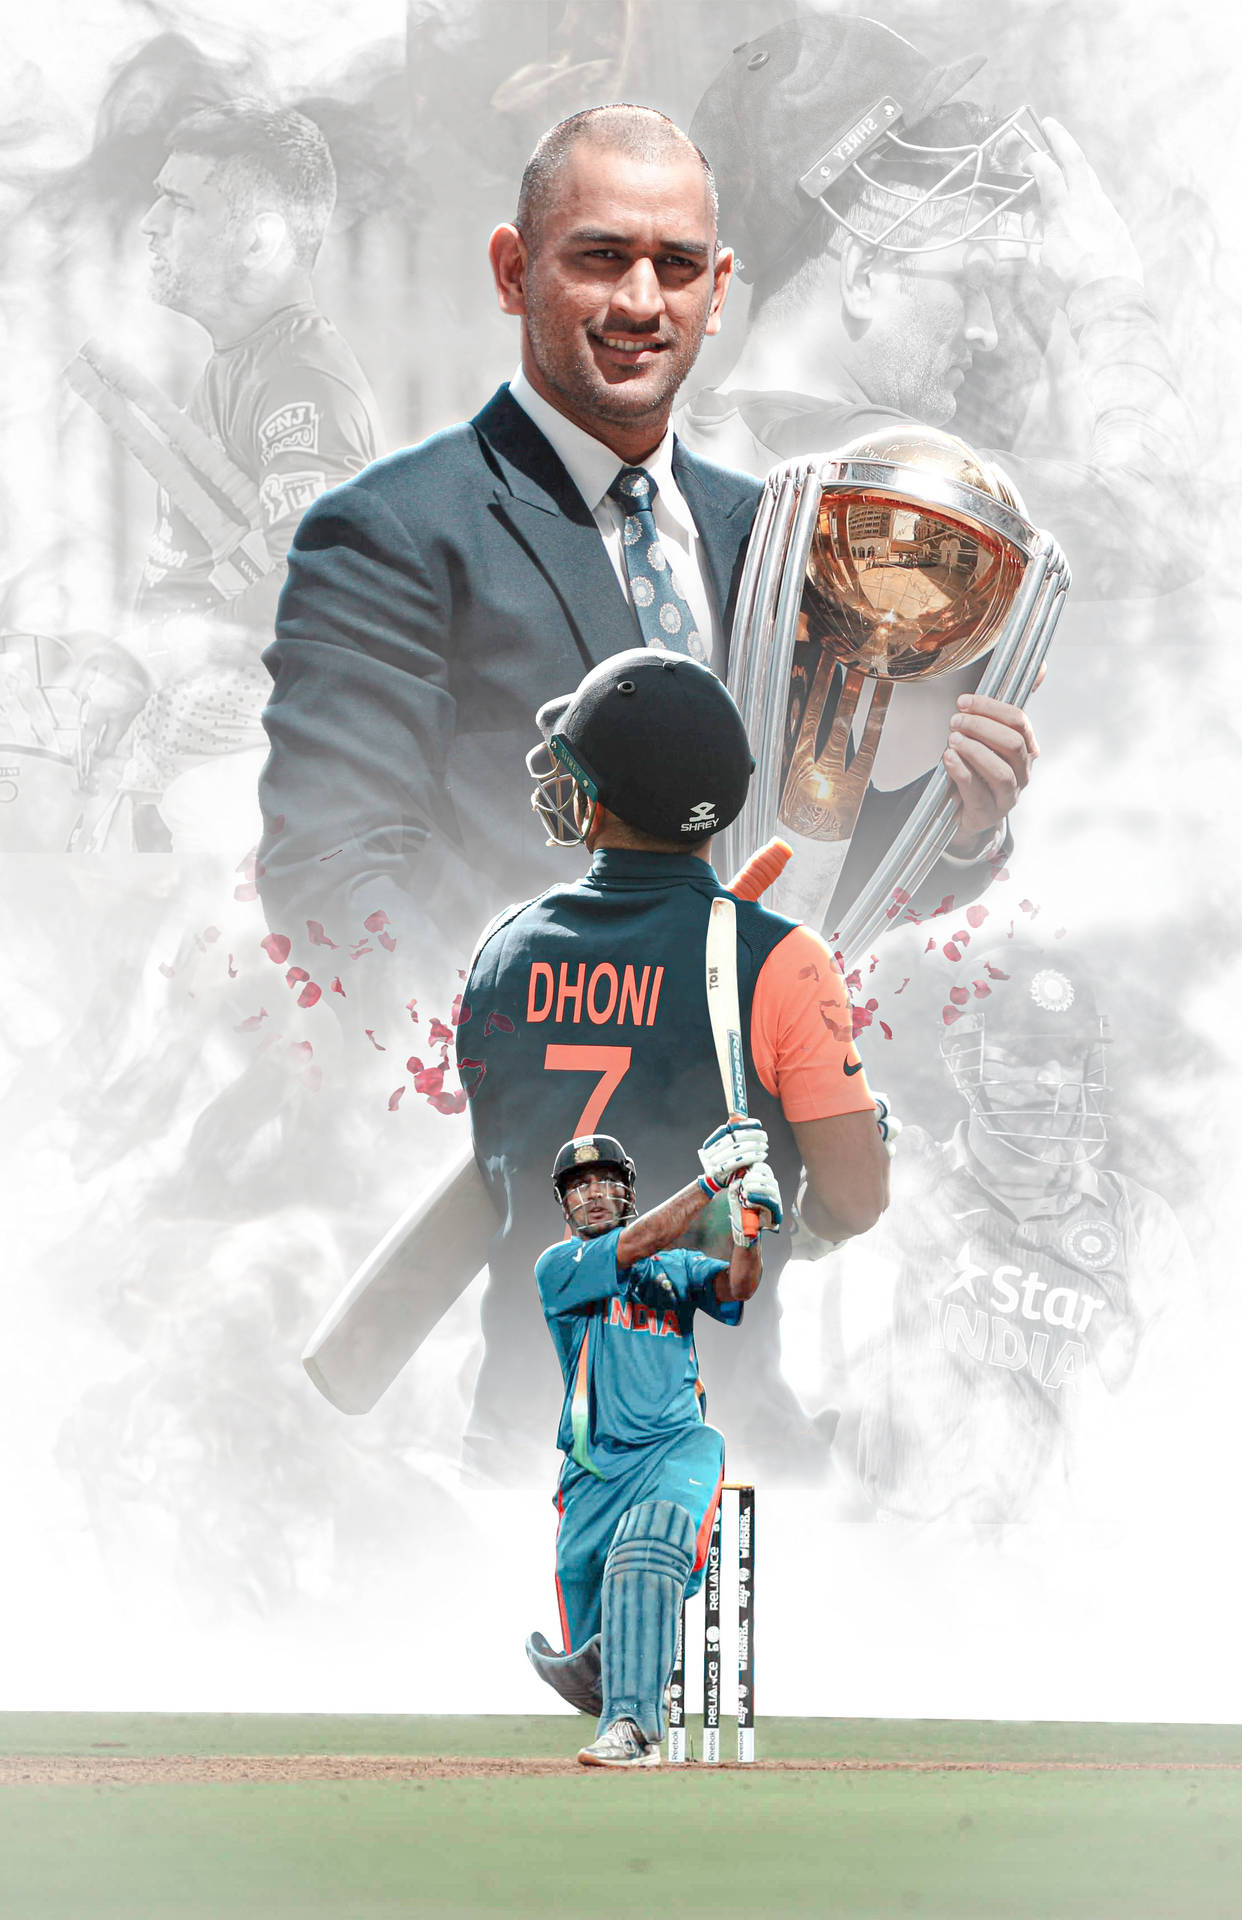 Icc World Cup Trophy Dhoni Hd Wallpaper